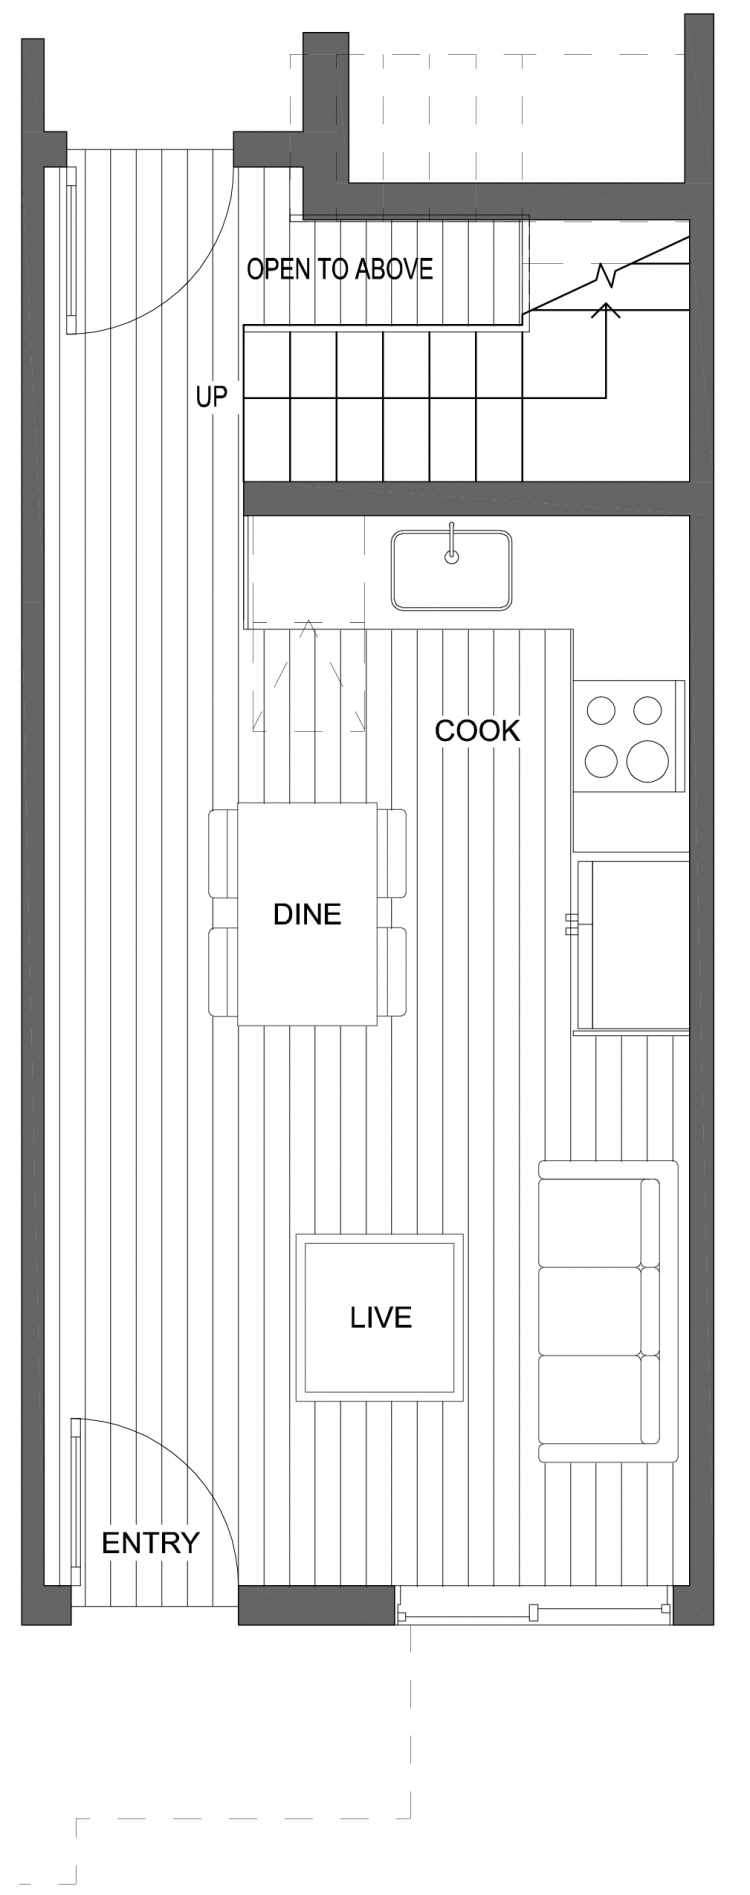 First Floor Plan of 10429C Alderbrook Pl NW, One of the Jasmine Townhomes in the Greenwood Neighborhood of Seattle